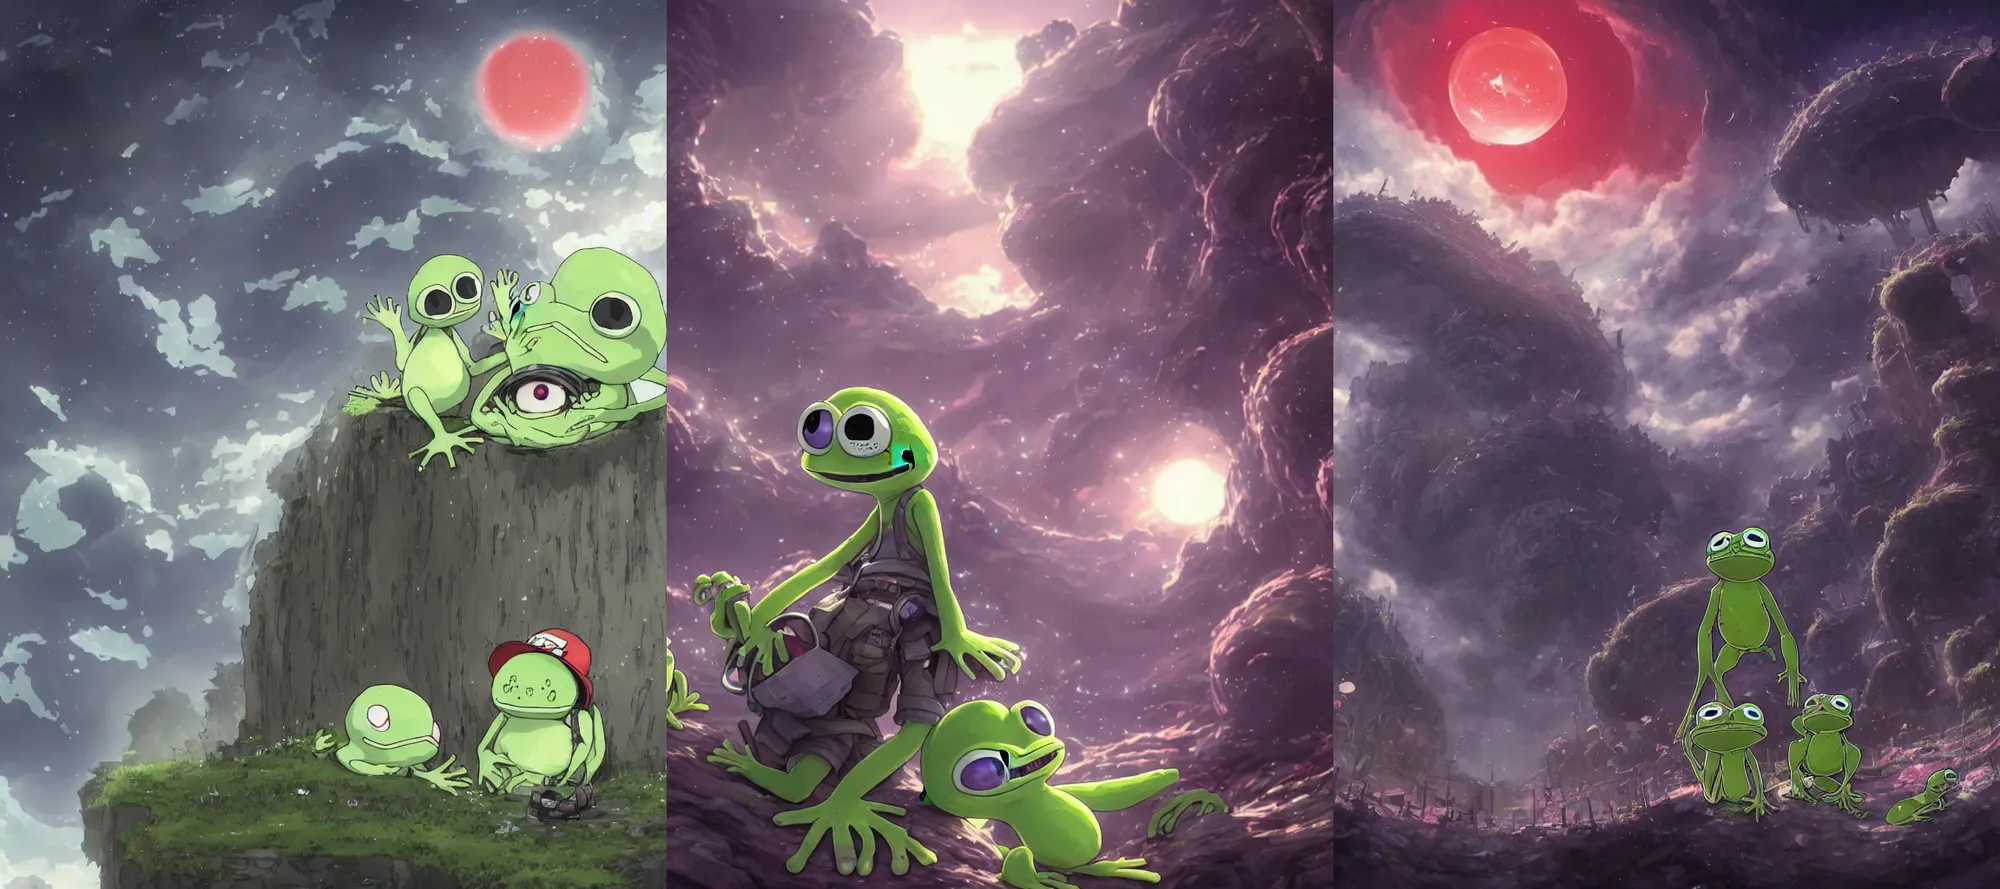 Prompt: resolution 4k worlds of loss and depression made in abyss design Akihito Tsukushi design body pepe the frog group of them attacking a monster war , battlefield darkness military drummer boy pepe , desolated city Akihito Tsukushi concept the sky is filled with red halos over each of their heads ivory dream like storybooks, fractals , pepe the frogs at war, art in the style of and Oleg Vdovenko and Akihito Tsukushi ,Stefan Koidl